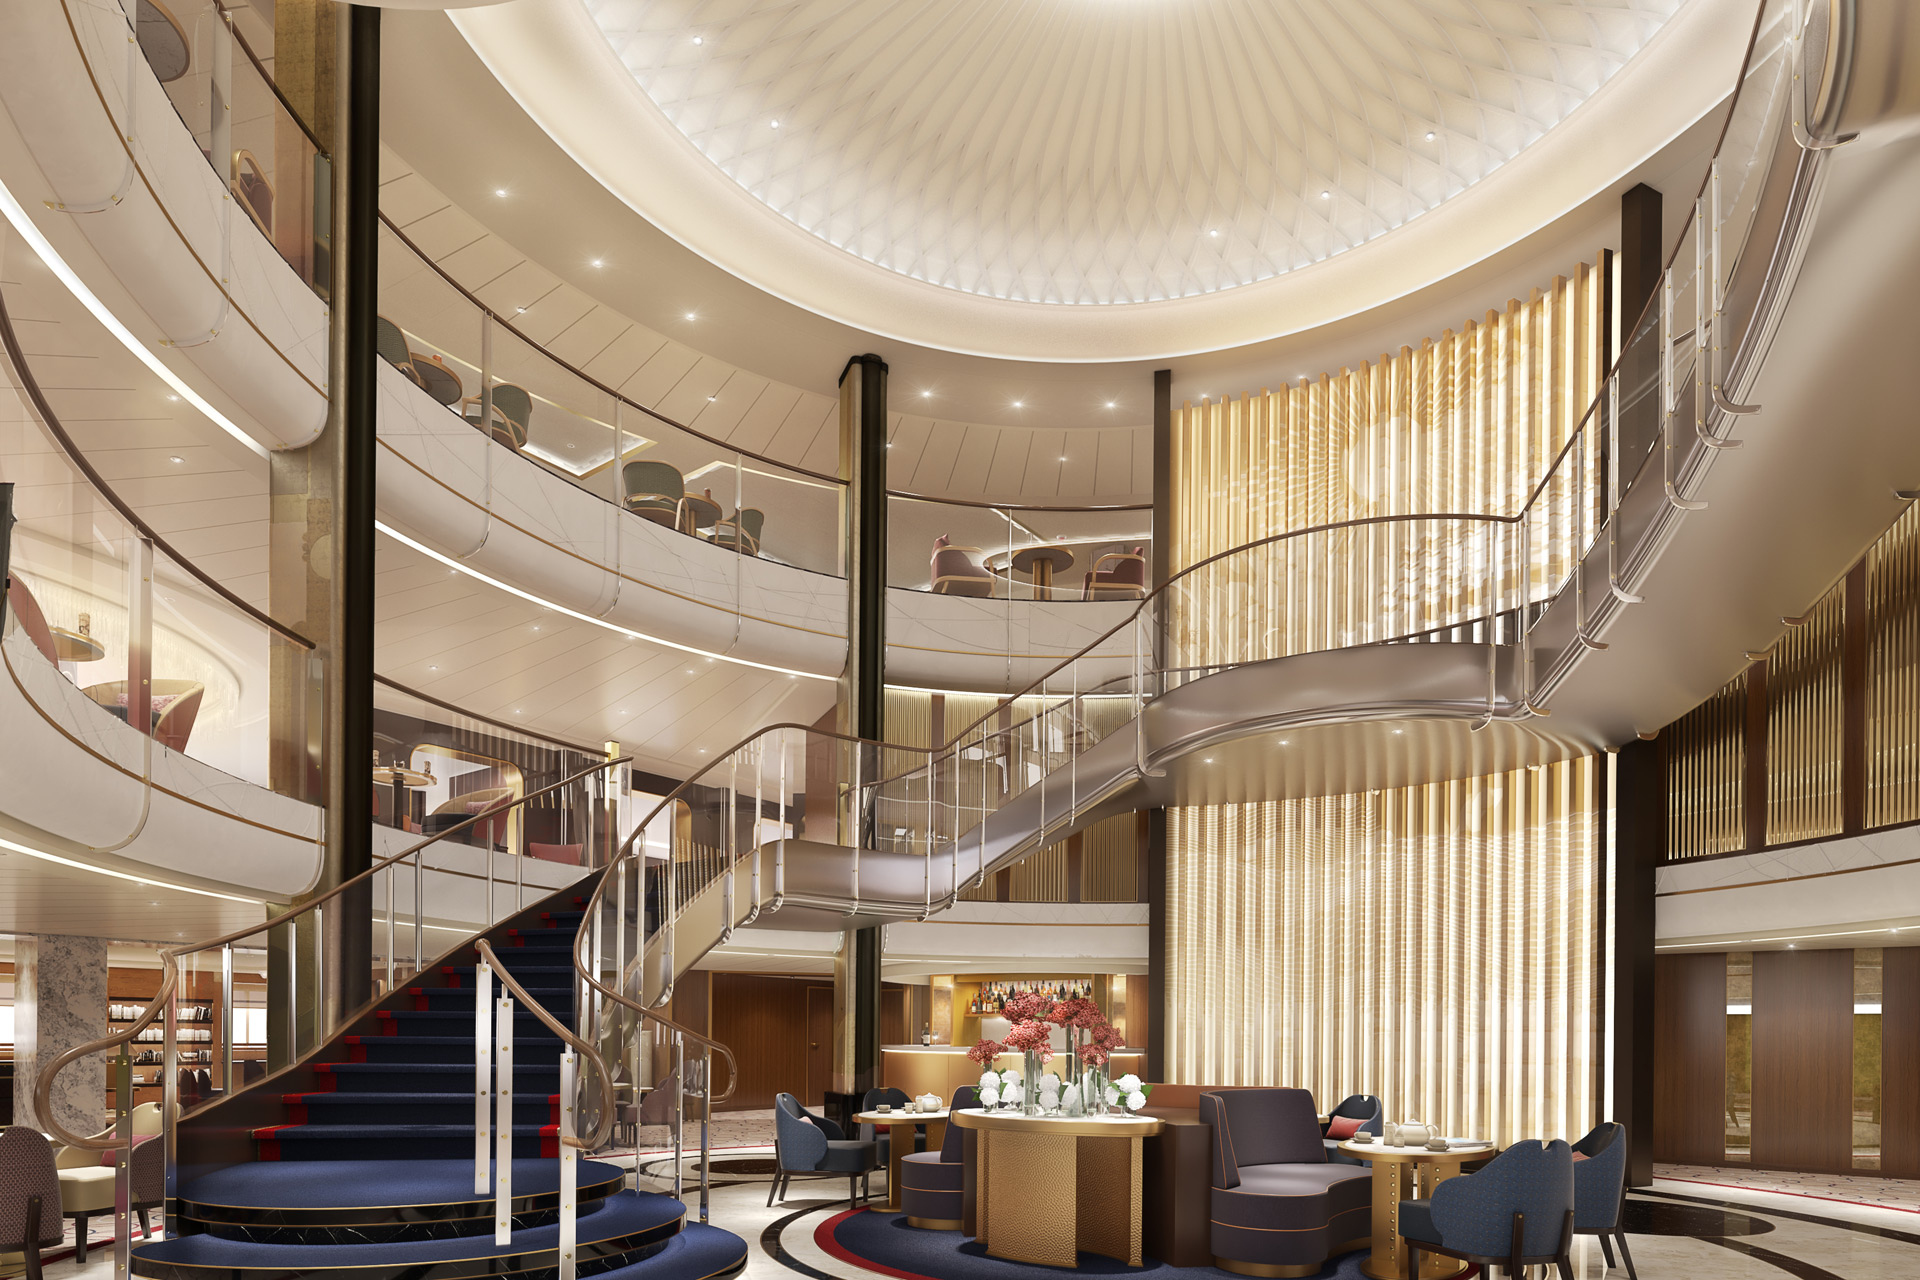 A CGI rendering of the lobby of the Queen Anne cruise ship.